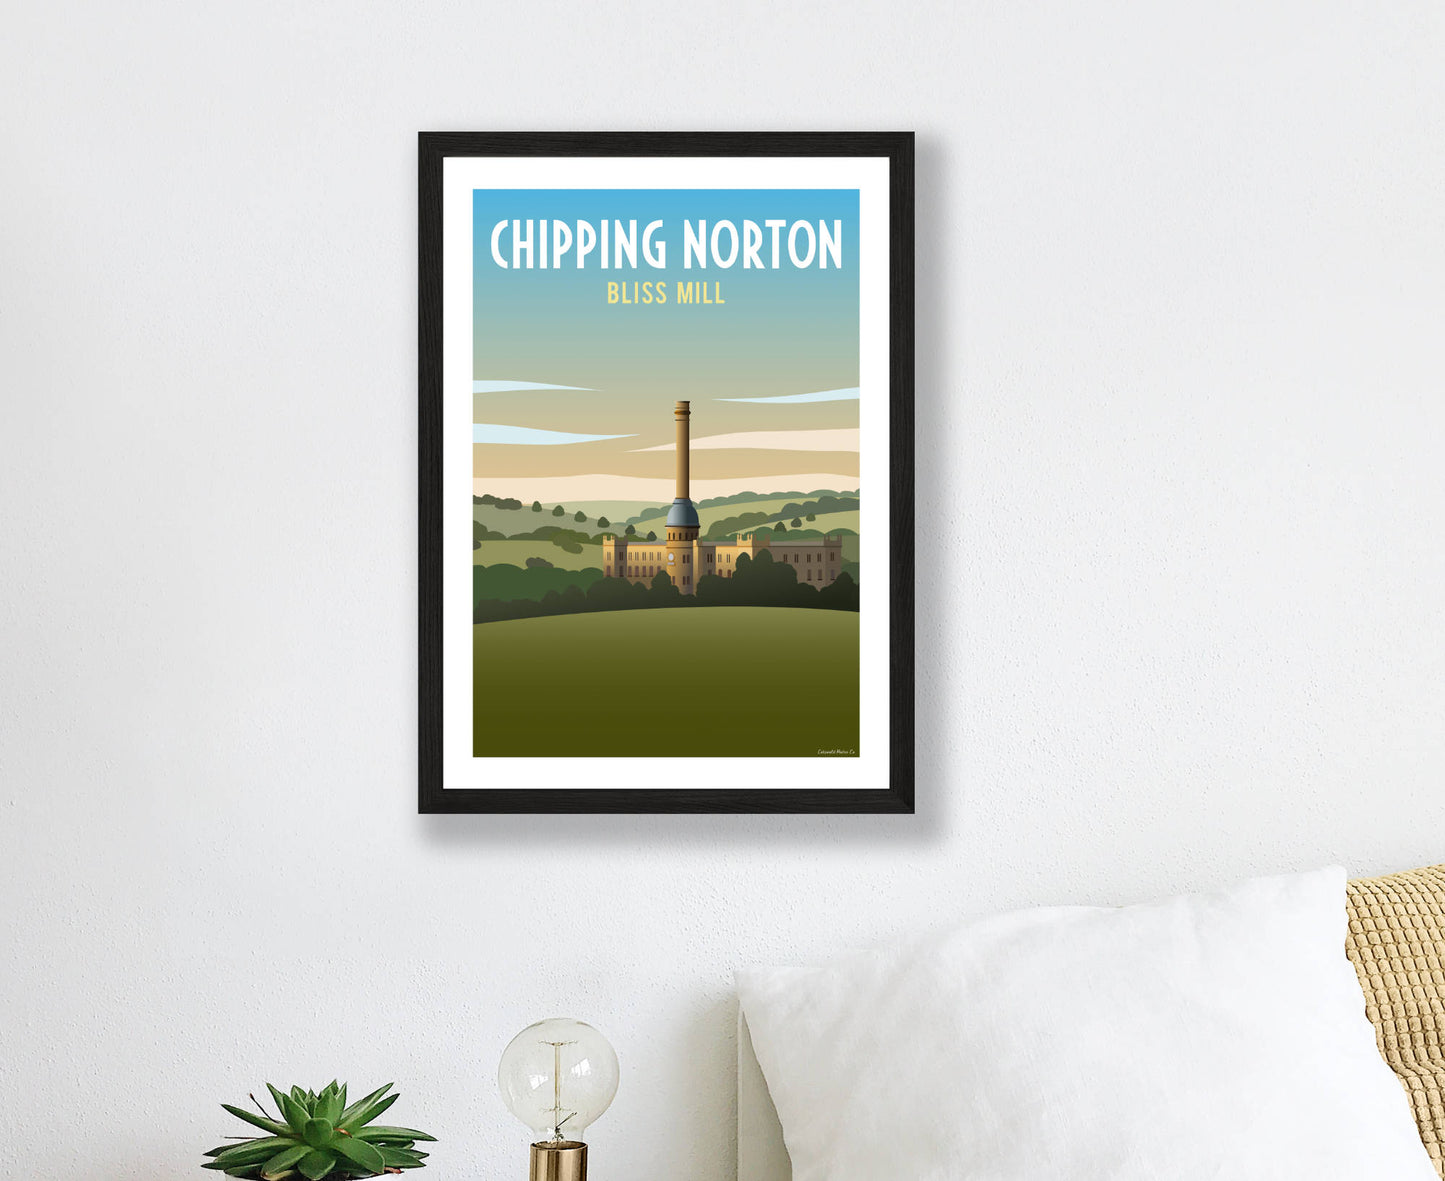 Chipping Norton Bliss Mill Poster in black frame